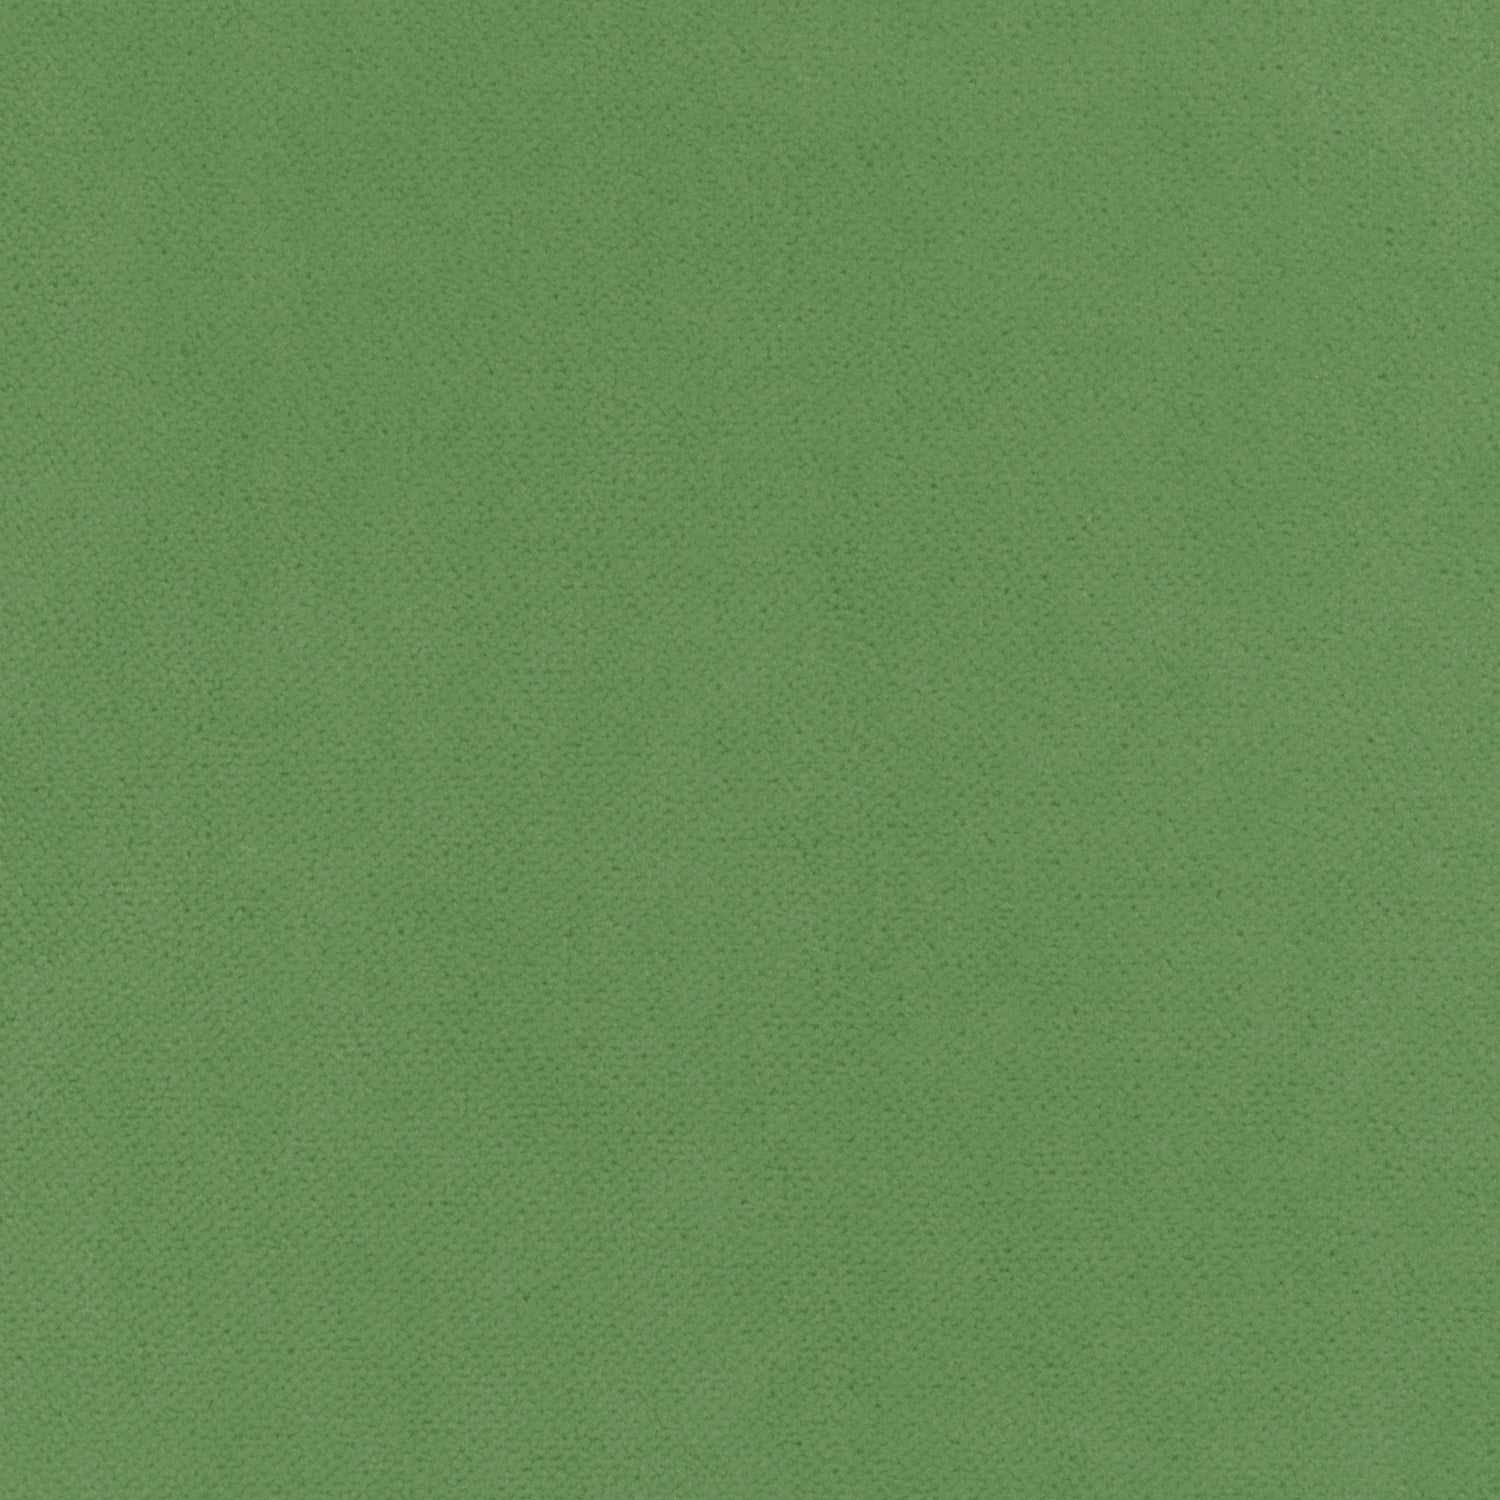 Club Velvet fabric in grass color - pattern number W7254 - by Thibaut in the Club Velvet collection